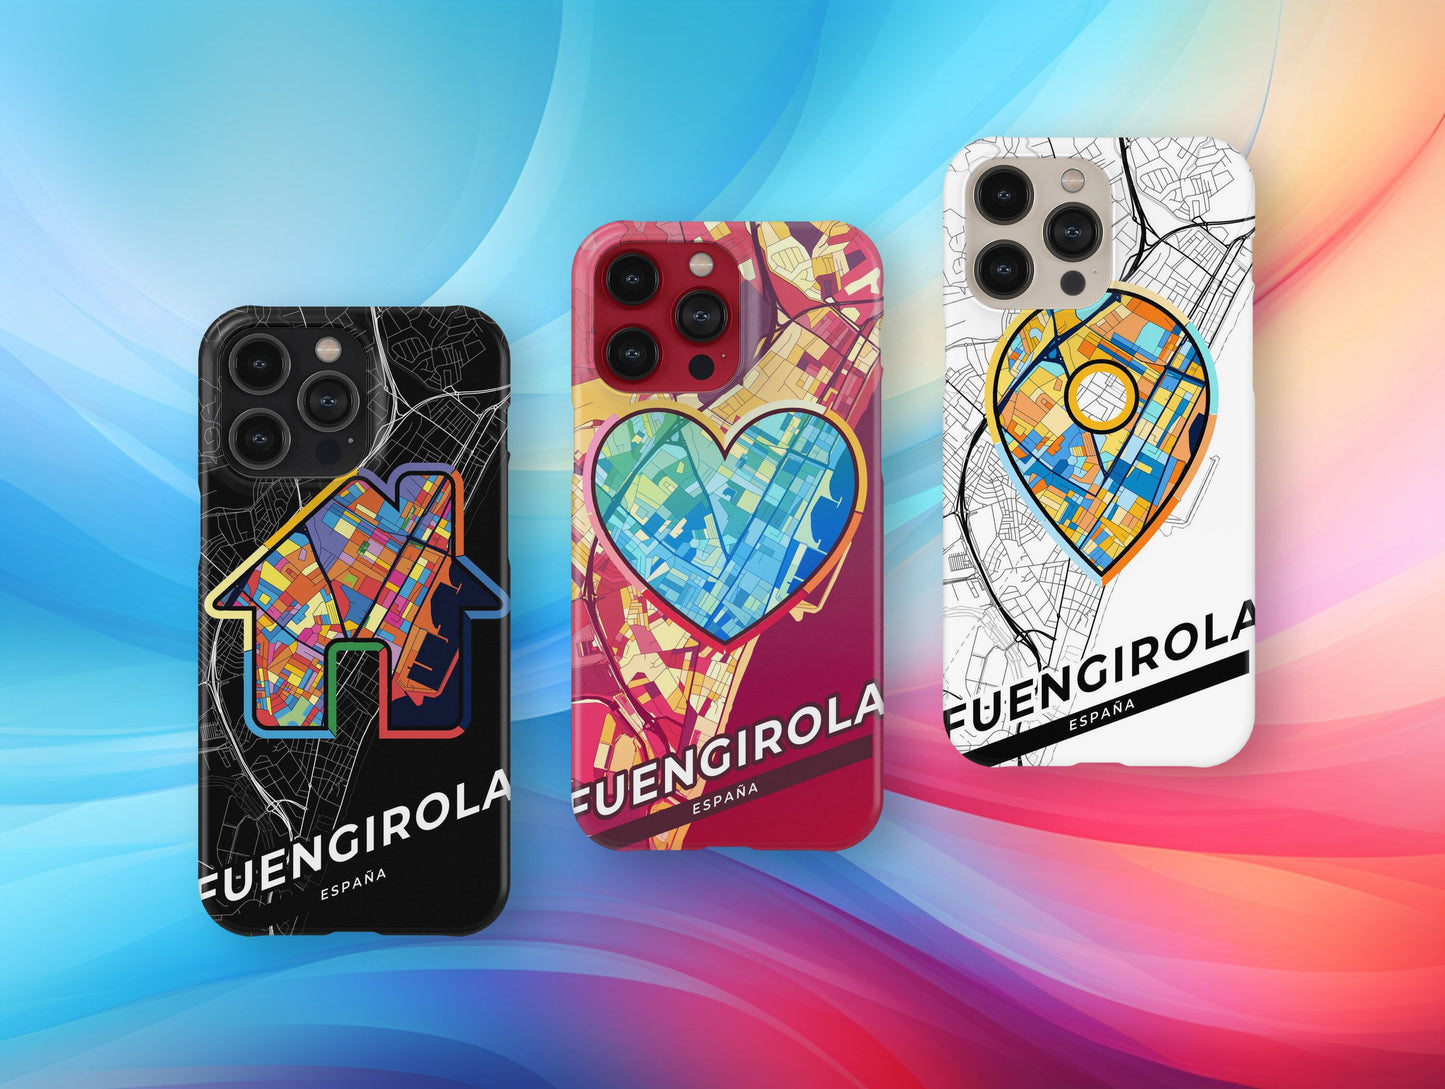 Fuengirola Spain slim phone case with colorful icon. Birthday, wedding or housewarming gift. Couple match cases.